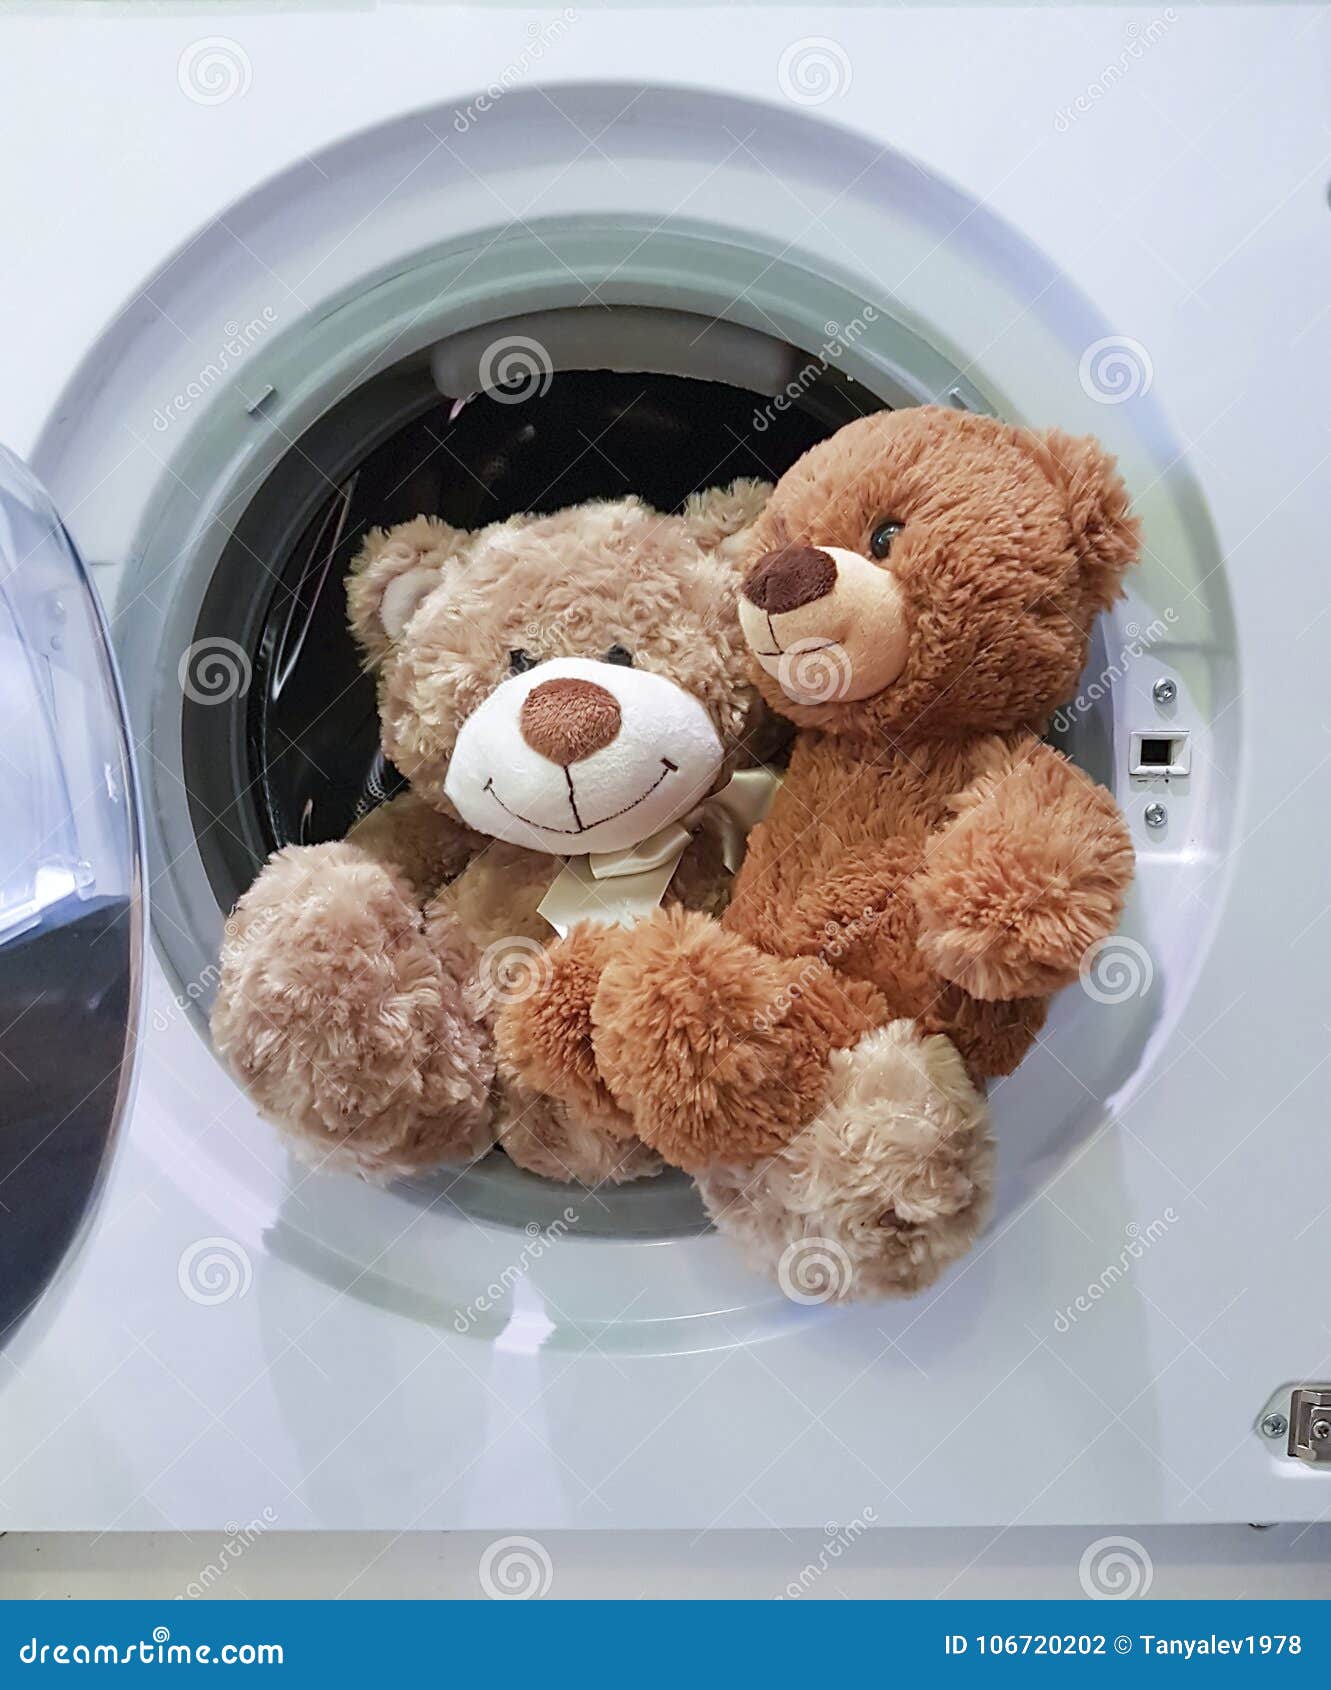 How to Wash a Teddy Bear (By Hand or In the Machine)